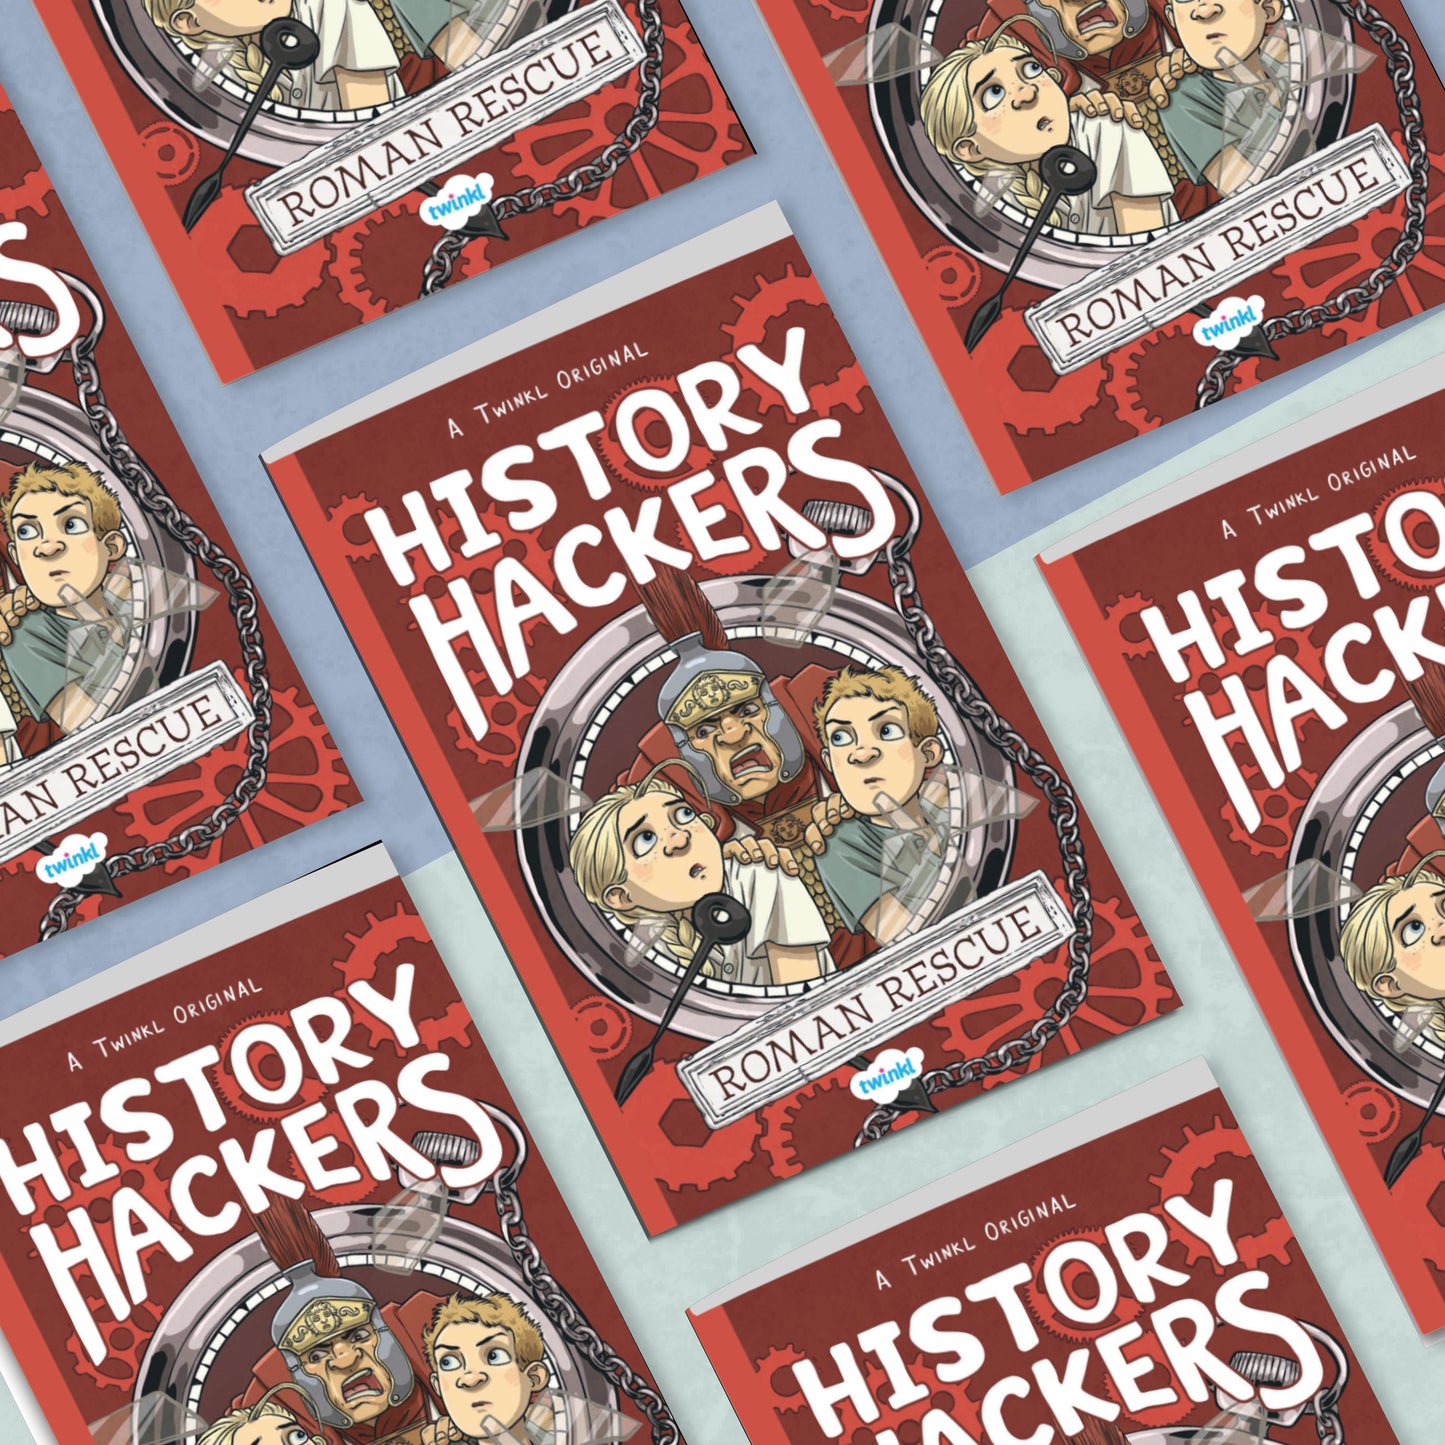 The History Hackers Trilogy (7-11)